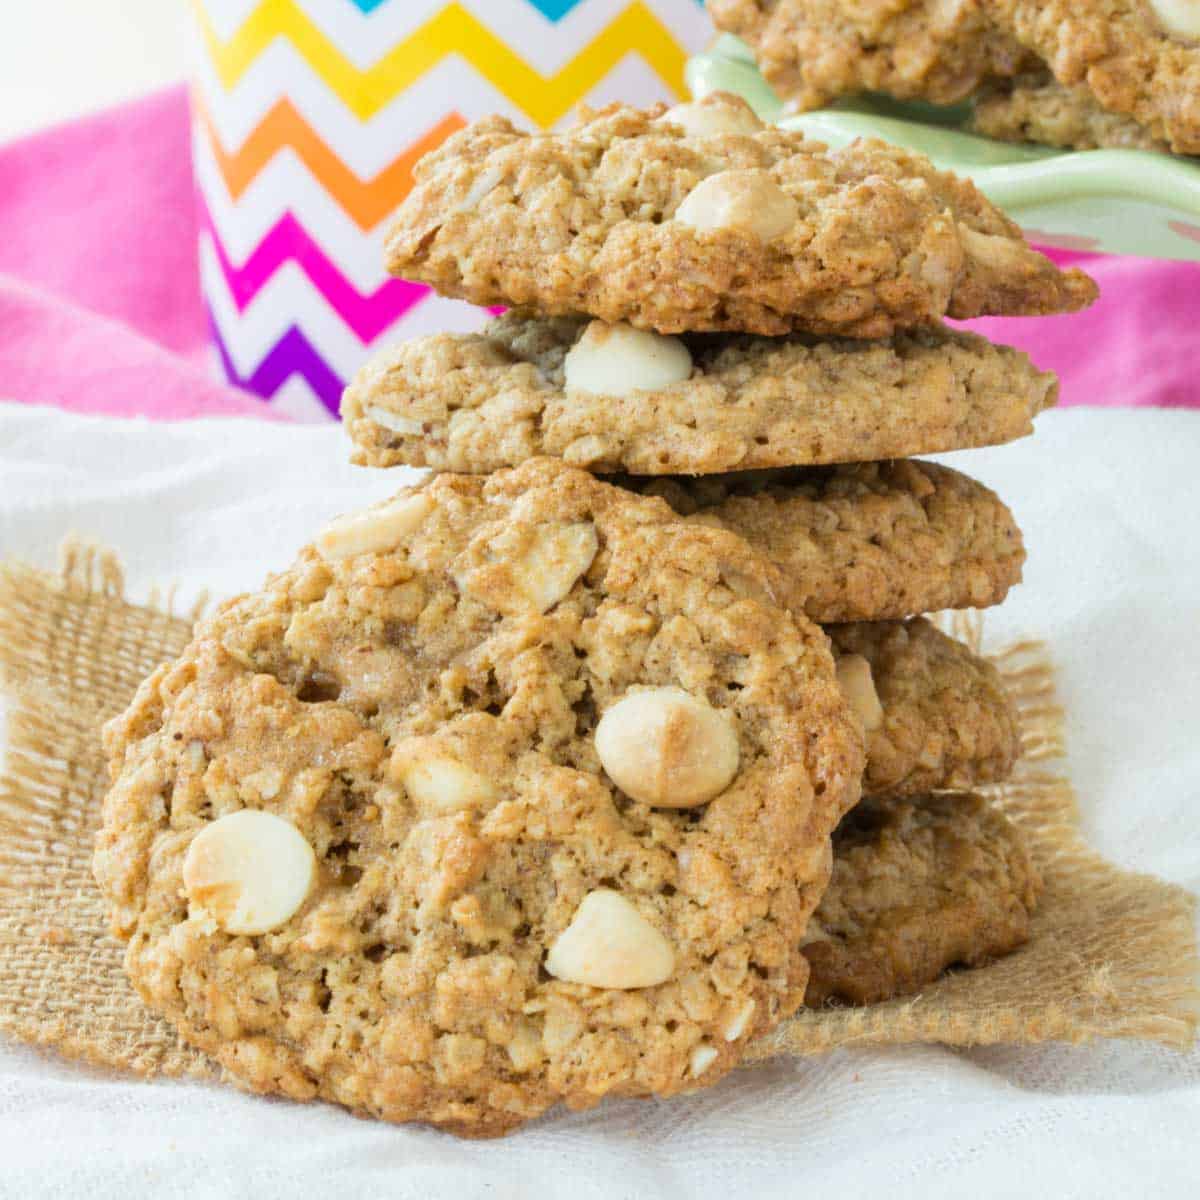 https://cupcakesandkalechips.com/wp-content/uploads/2016/05/Gluten-Free-Toffee-White-Chocolate-Chip-Oatmeal-Cookies-Recipe-6921.jpg